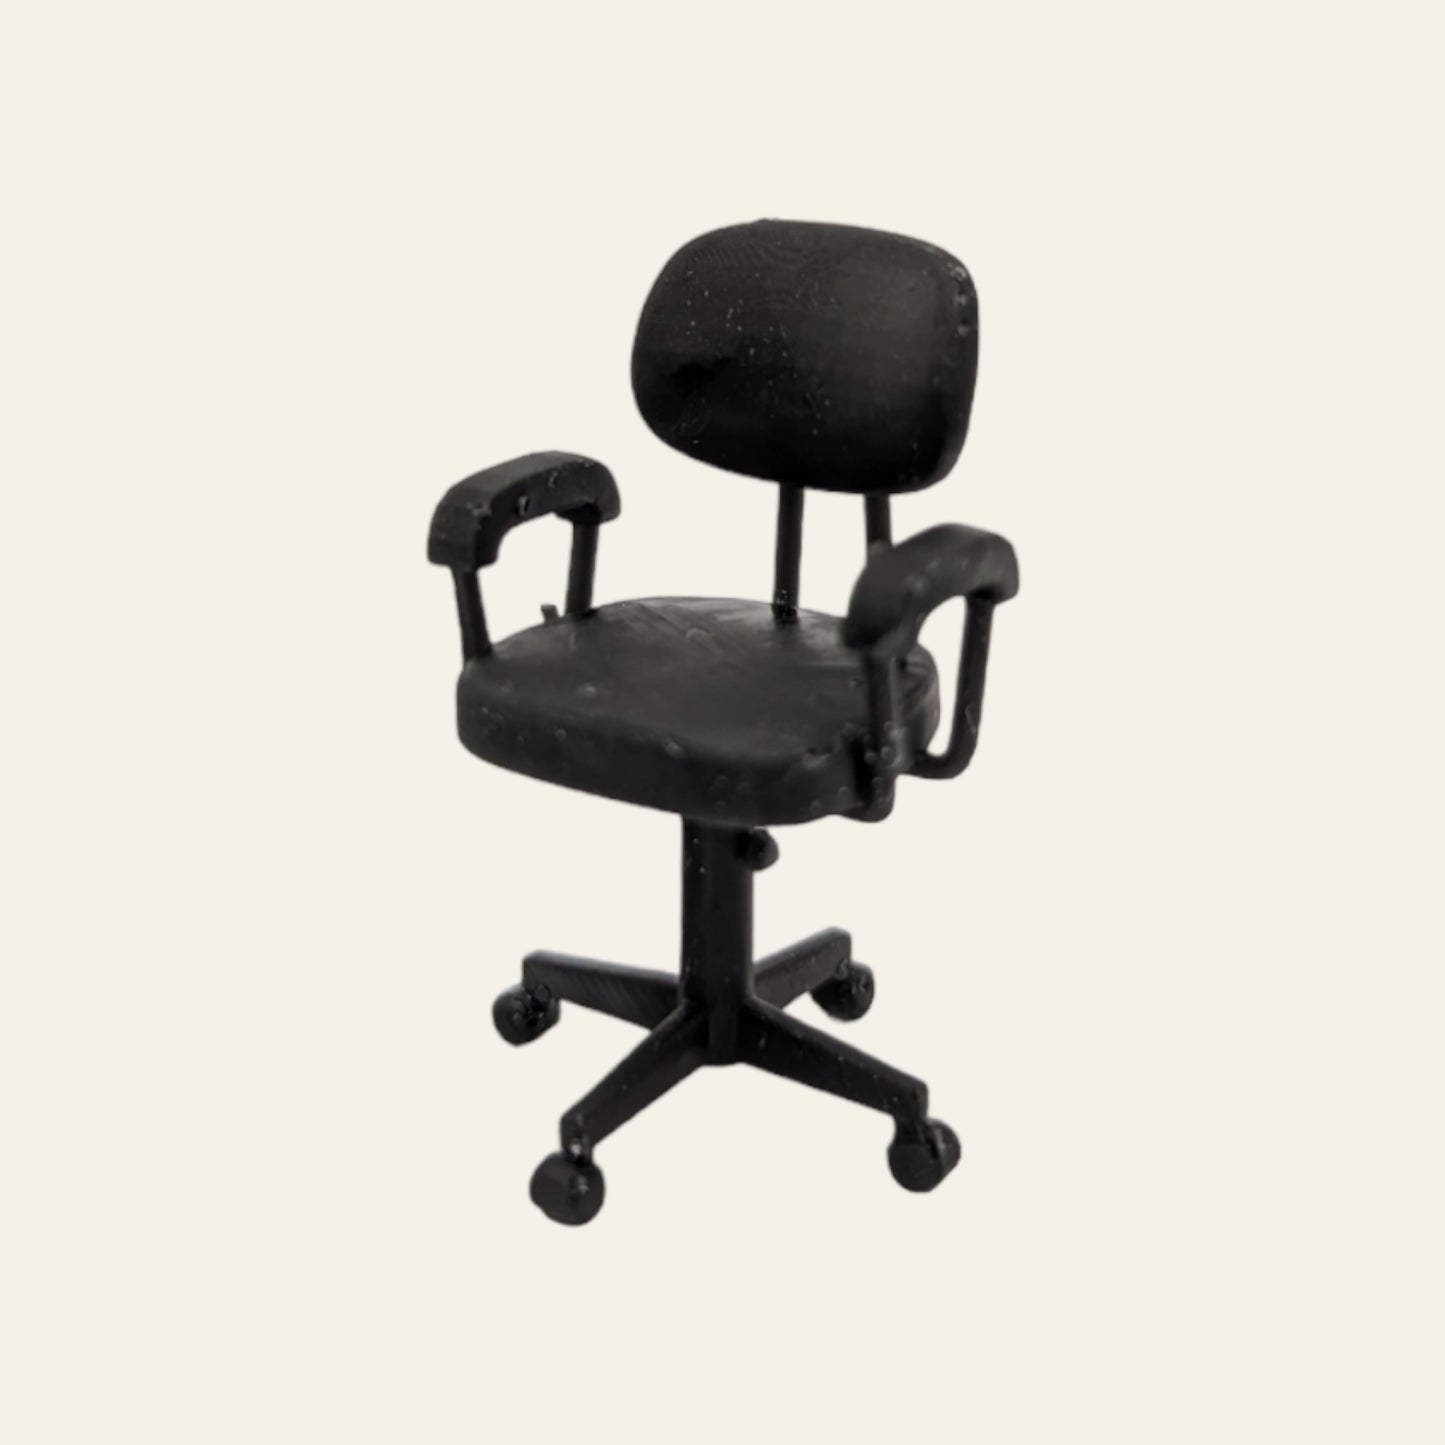 Scale model of a small office swivel chair